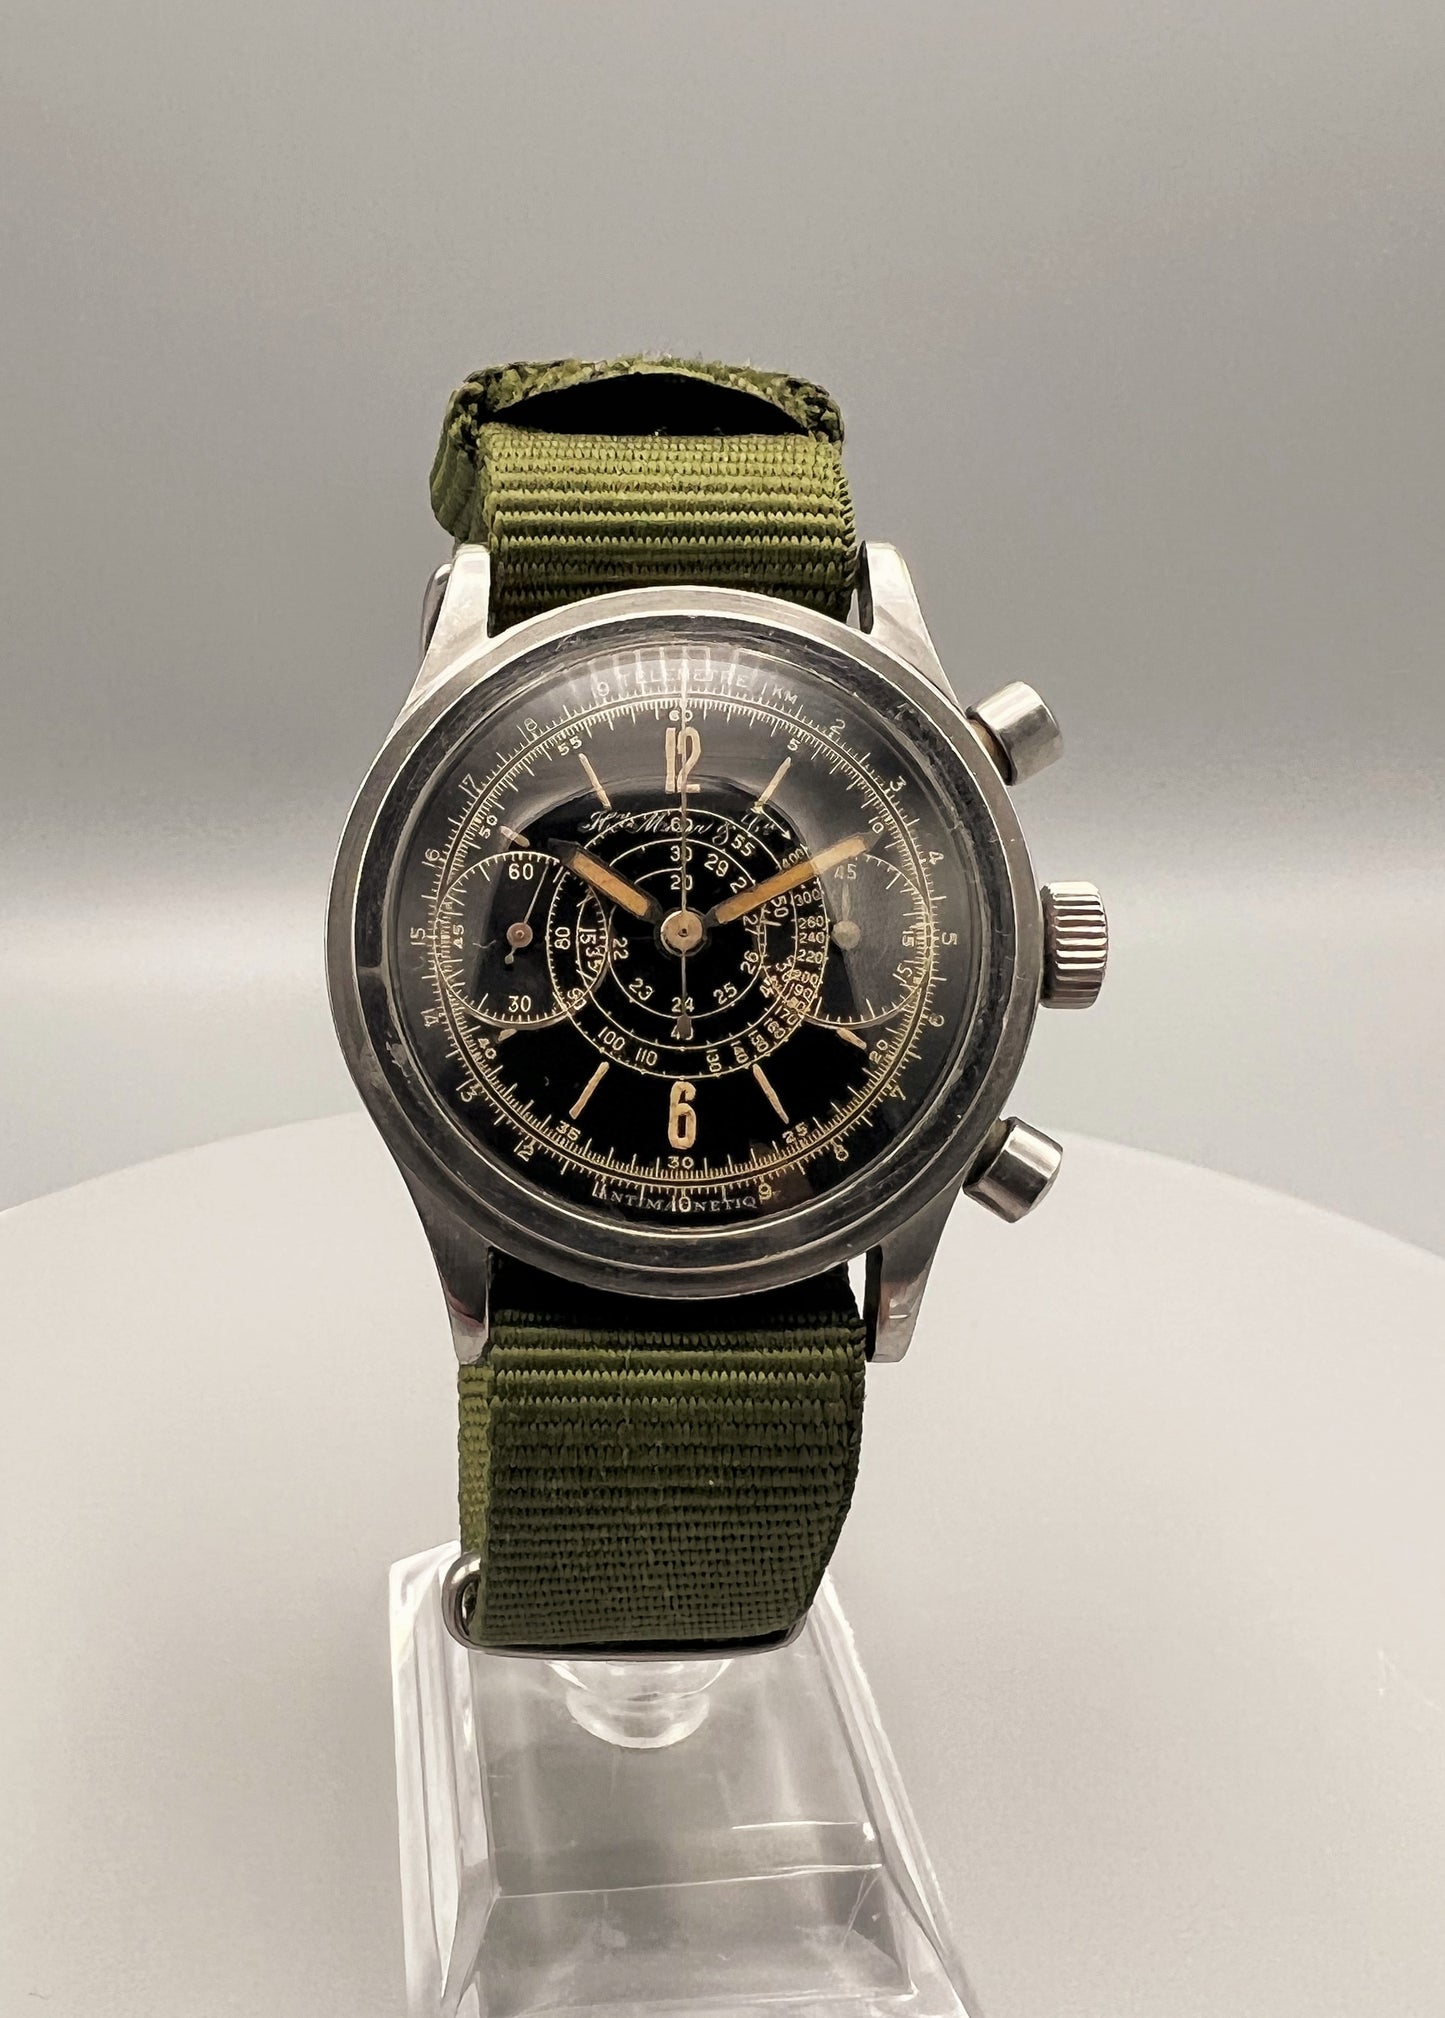 H. Moser & Cie, a very rare, oversized stainless steel chronograph, w/ black lacquer gilt printed dial, 1945